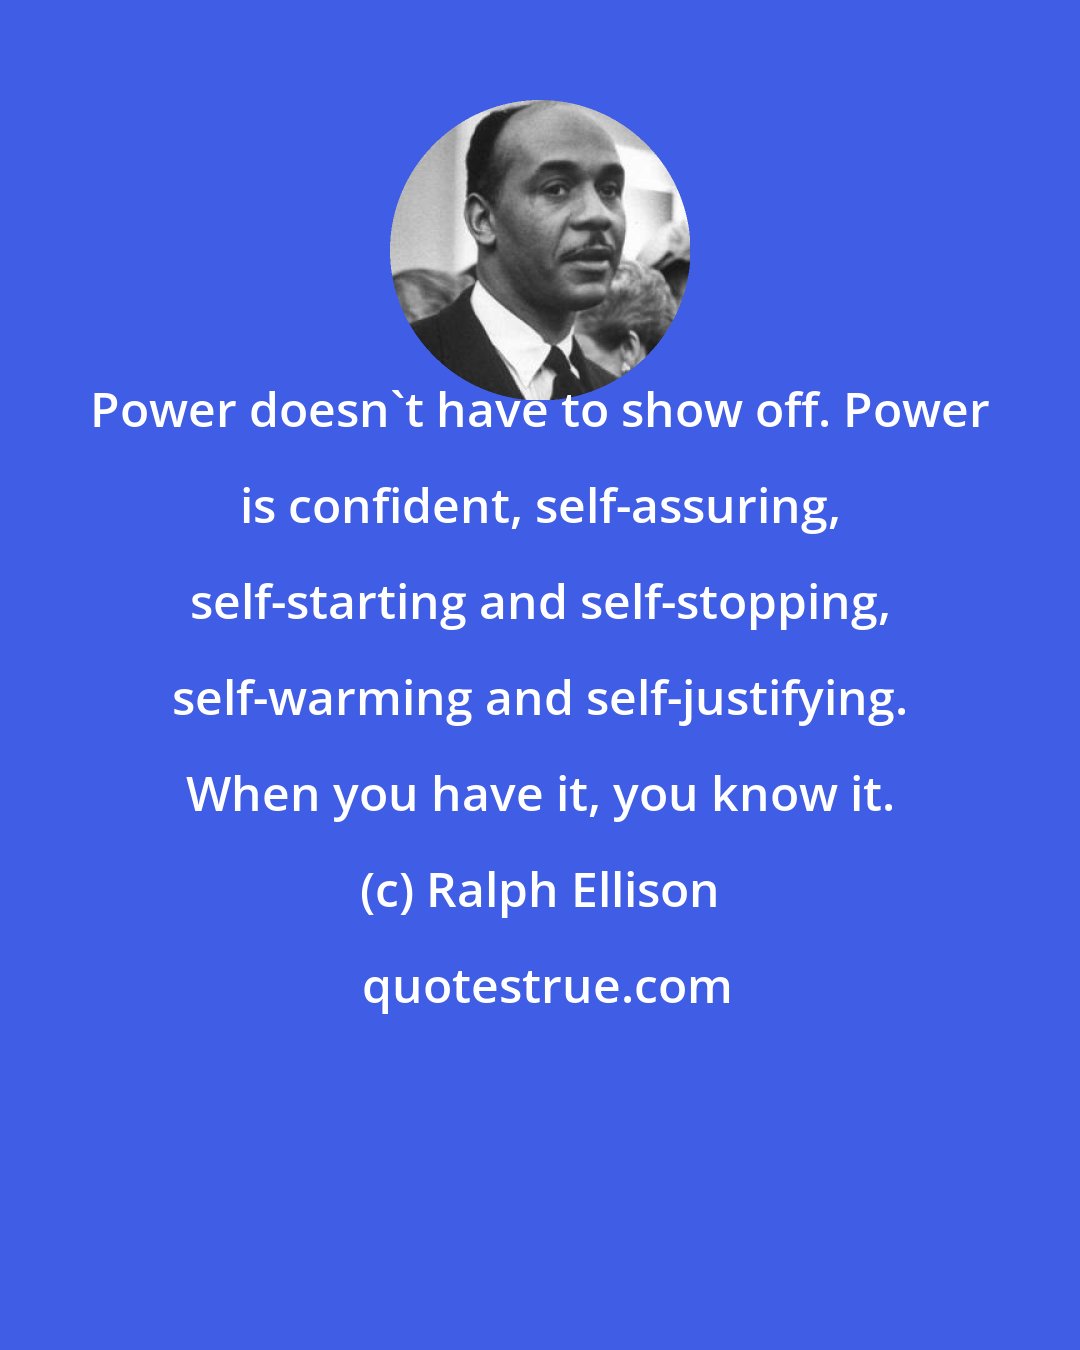 Ralph Ellison: Power doesn't have to show off. Power is confident, self-assuring, self-starting and self-stopping, self-warming and self-justifying. When you have it, you know it.